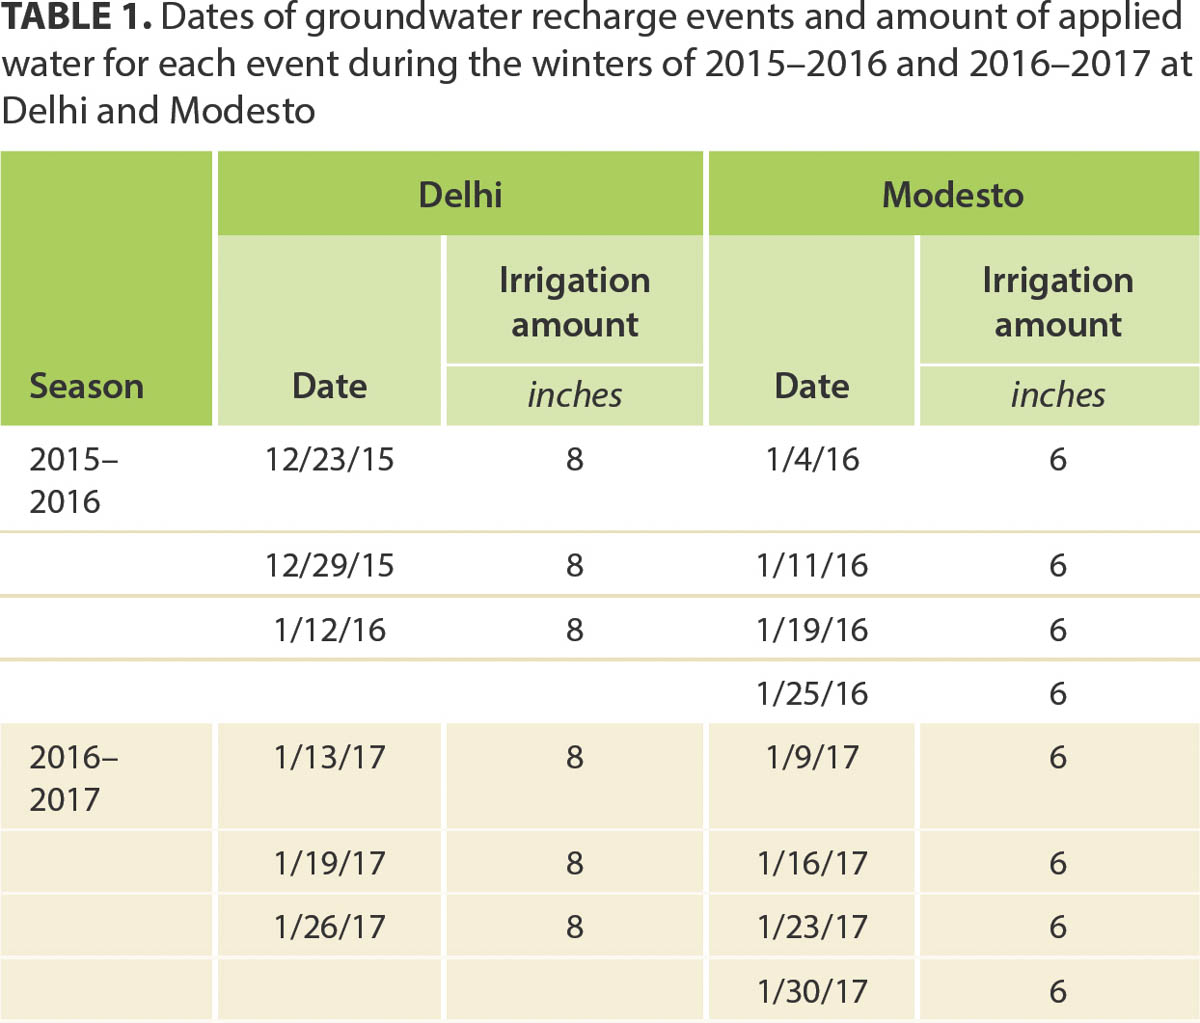 Dates of groundwater recharge events and amount of applied water for each event during the winters of 2015–2016 and 2016–2017 at Delhi and Modesto